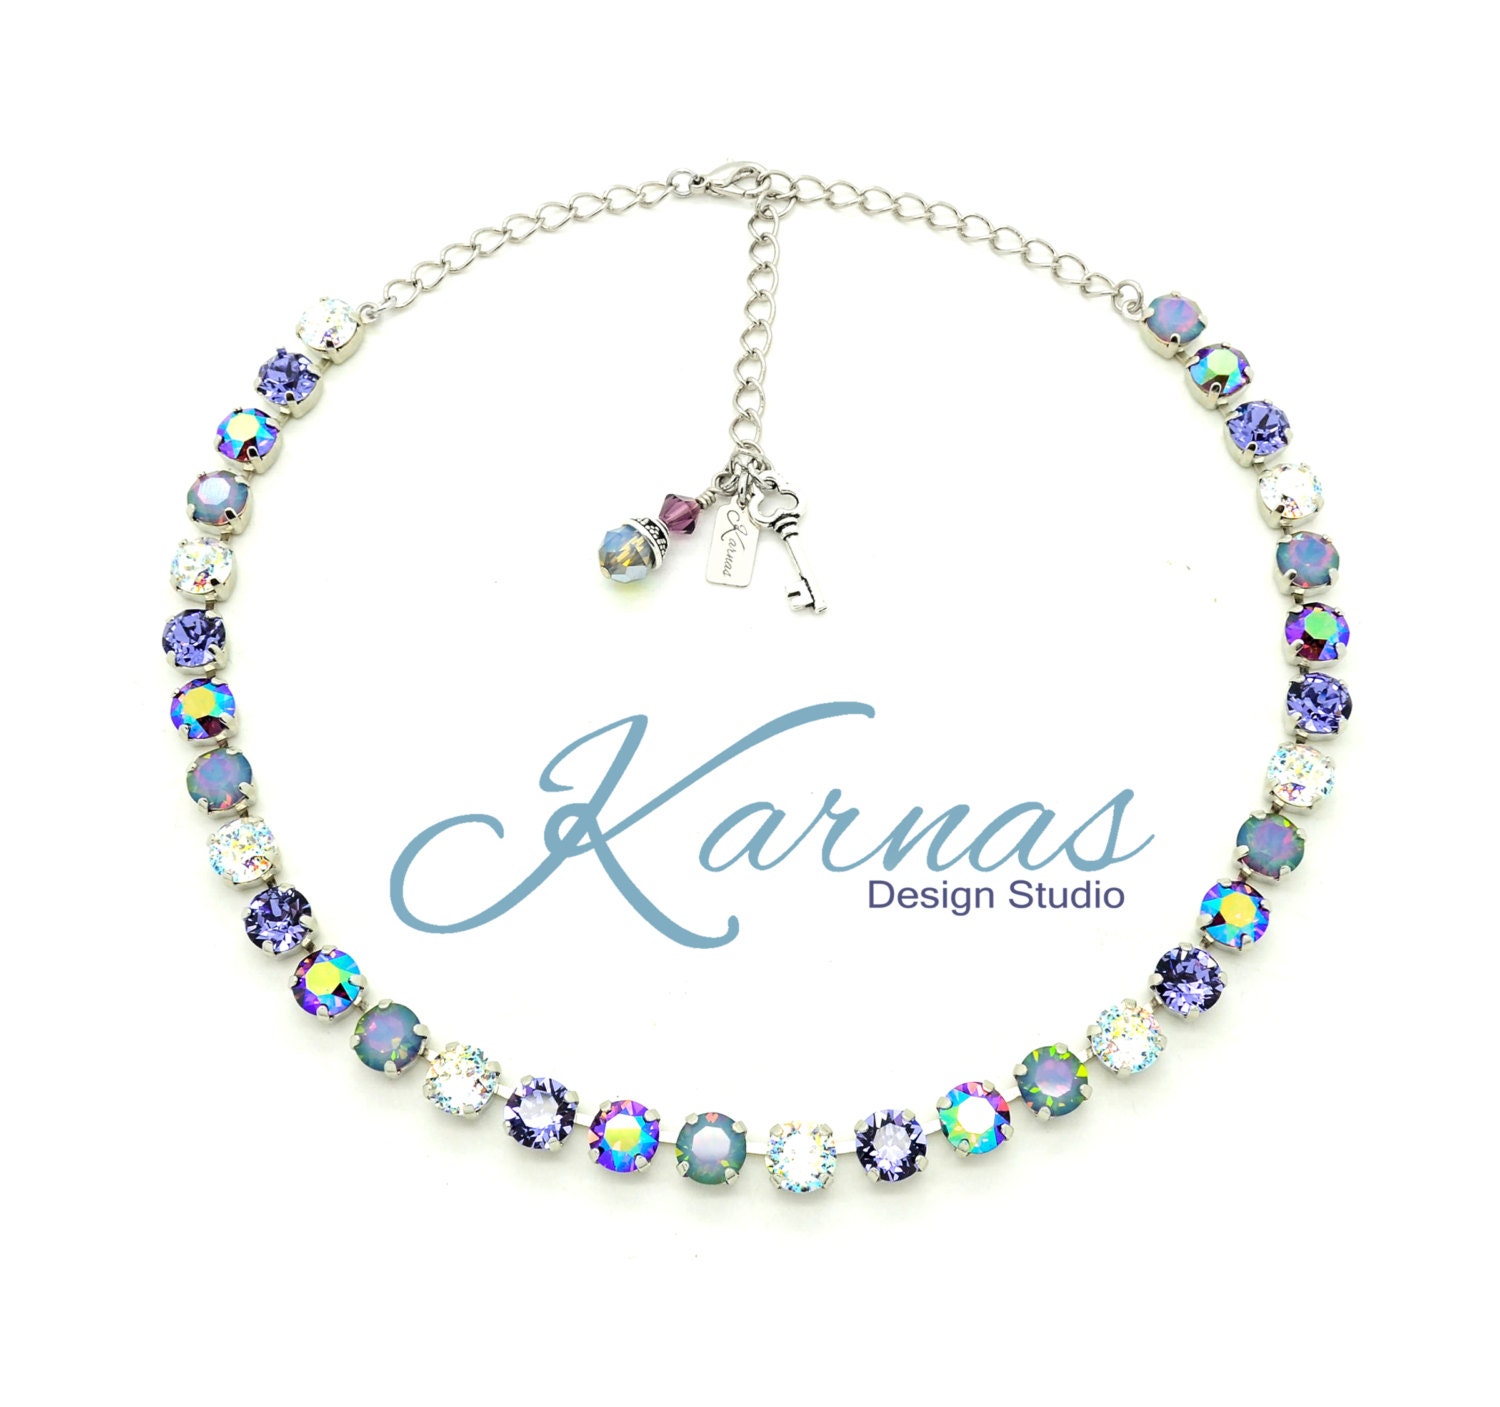 Amethyst Rainbow 8mm Crystal Chaton Necklace Made With K.d.s. Premium Pick Your Finish Karnas Design Studio Free Shipping